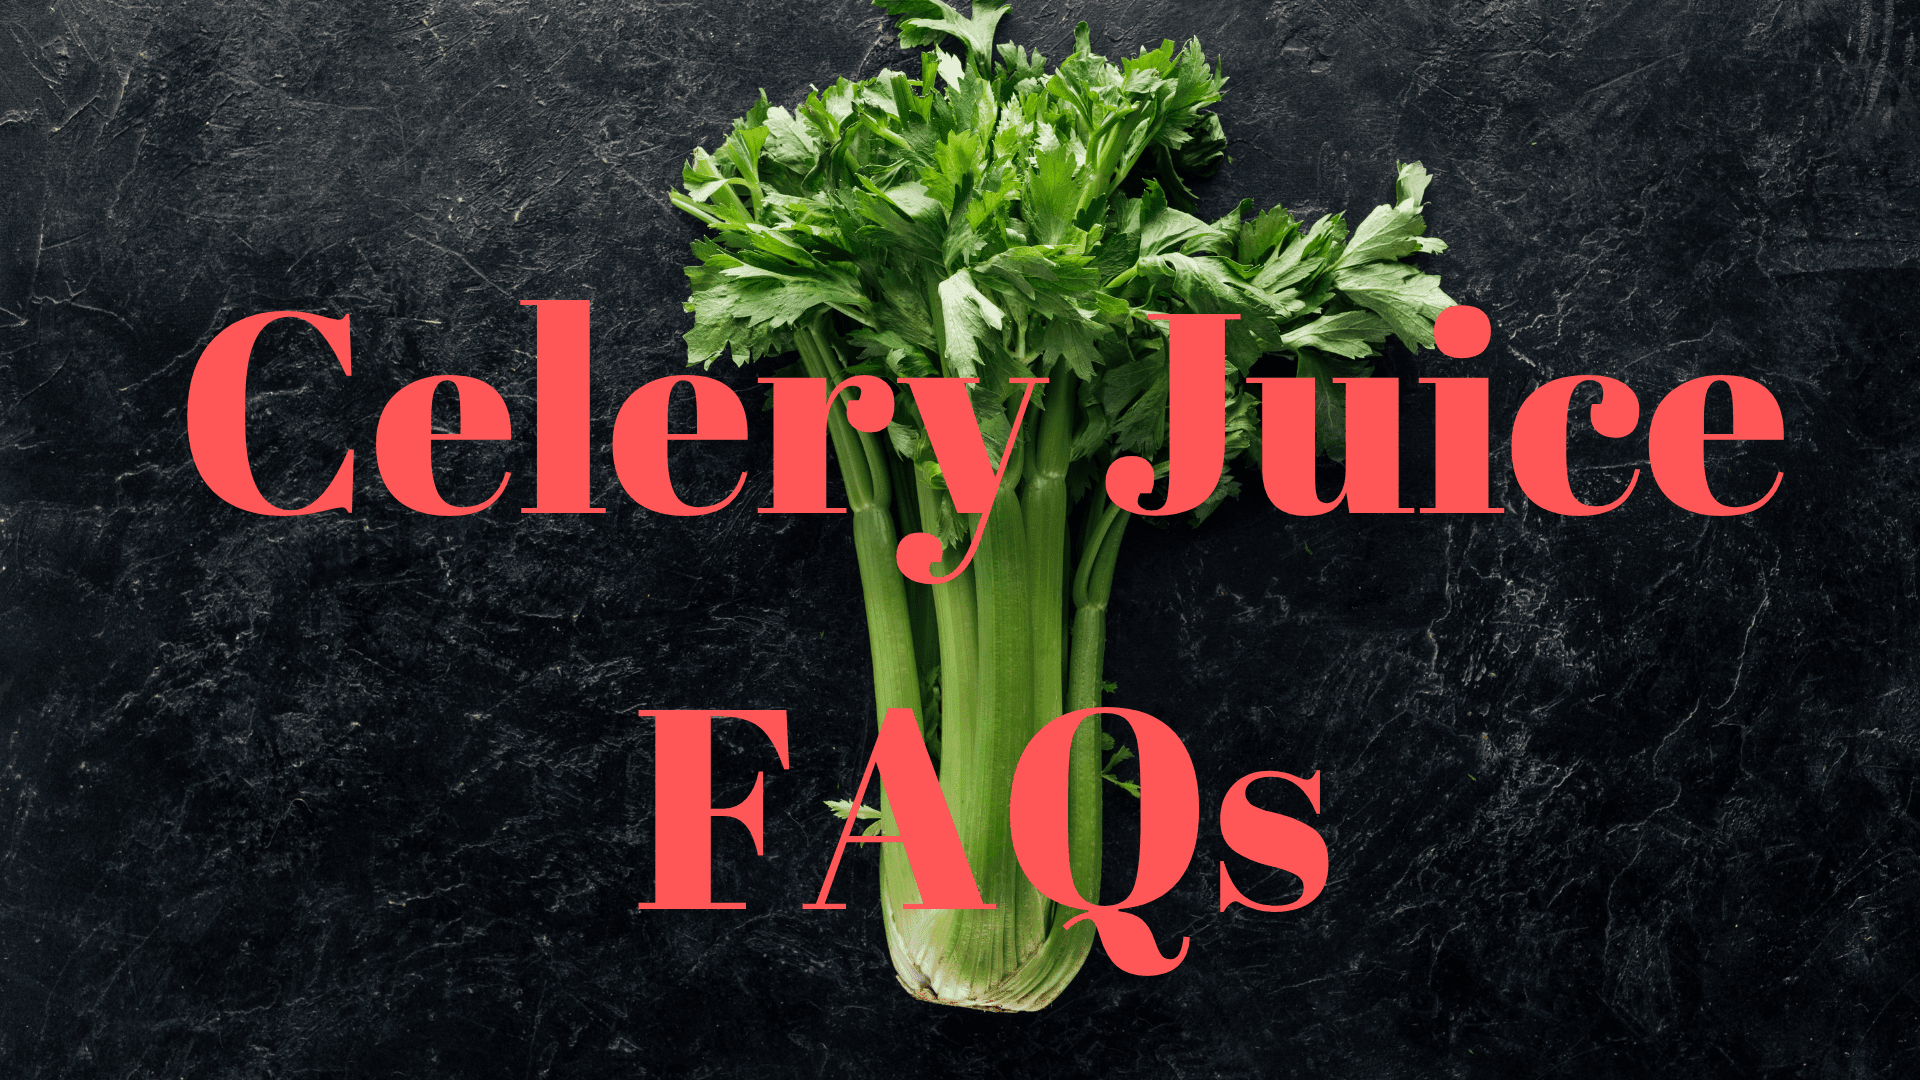 Image of celery on a black marble table with words "Celery Juice FAQs" written across top of image in red lettering